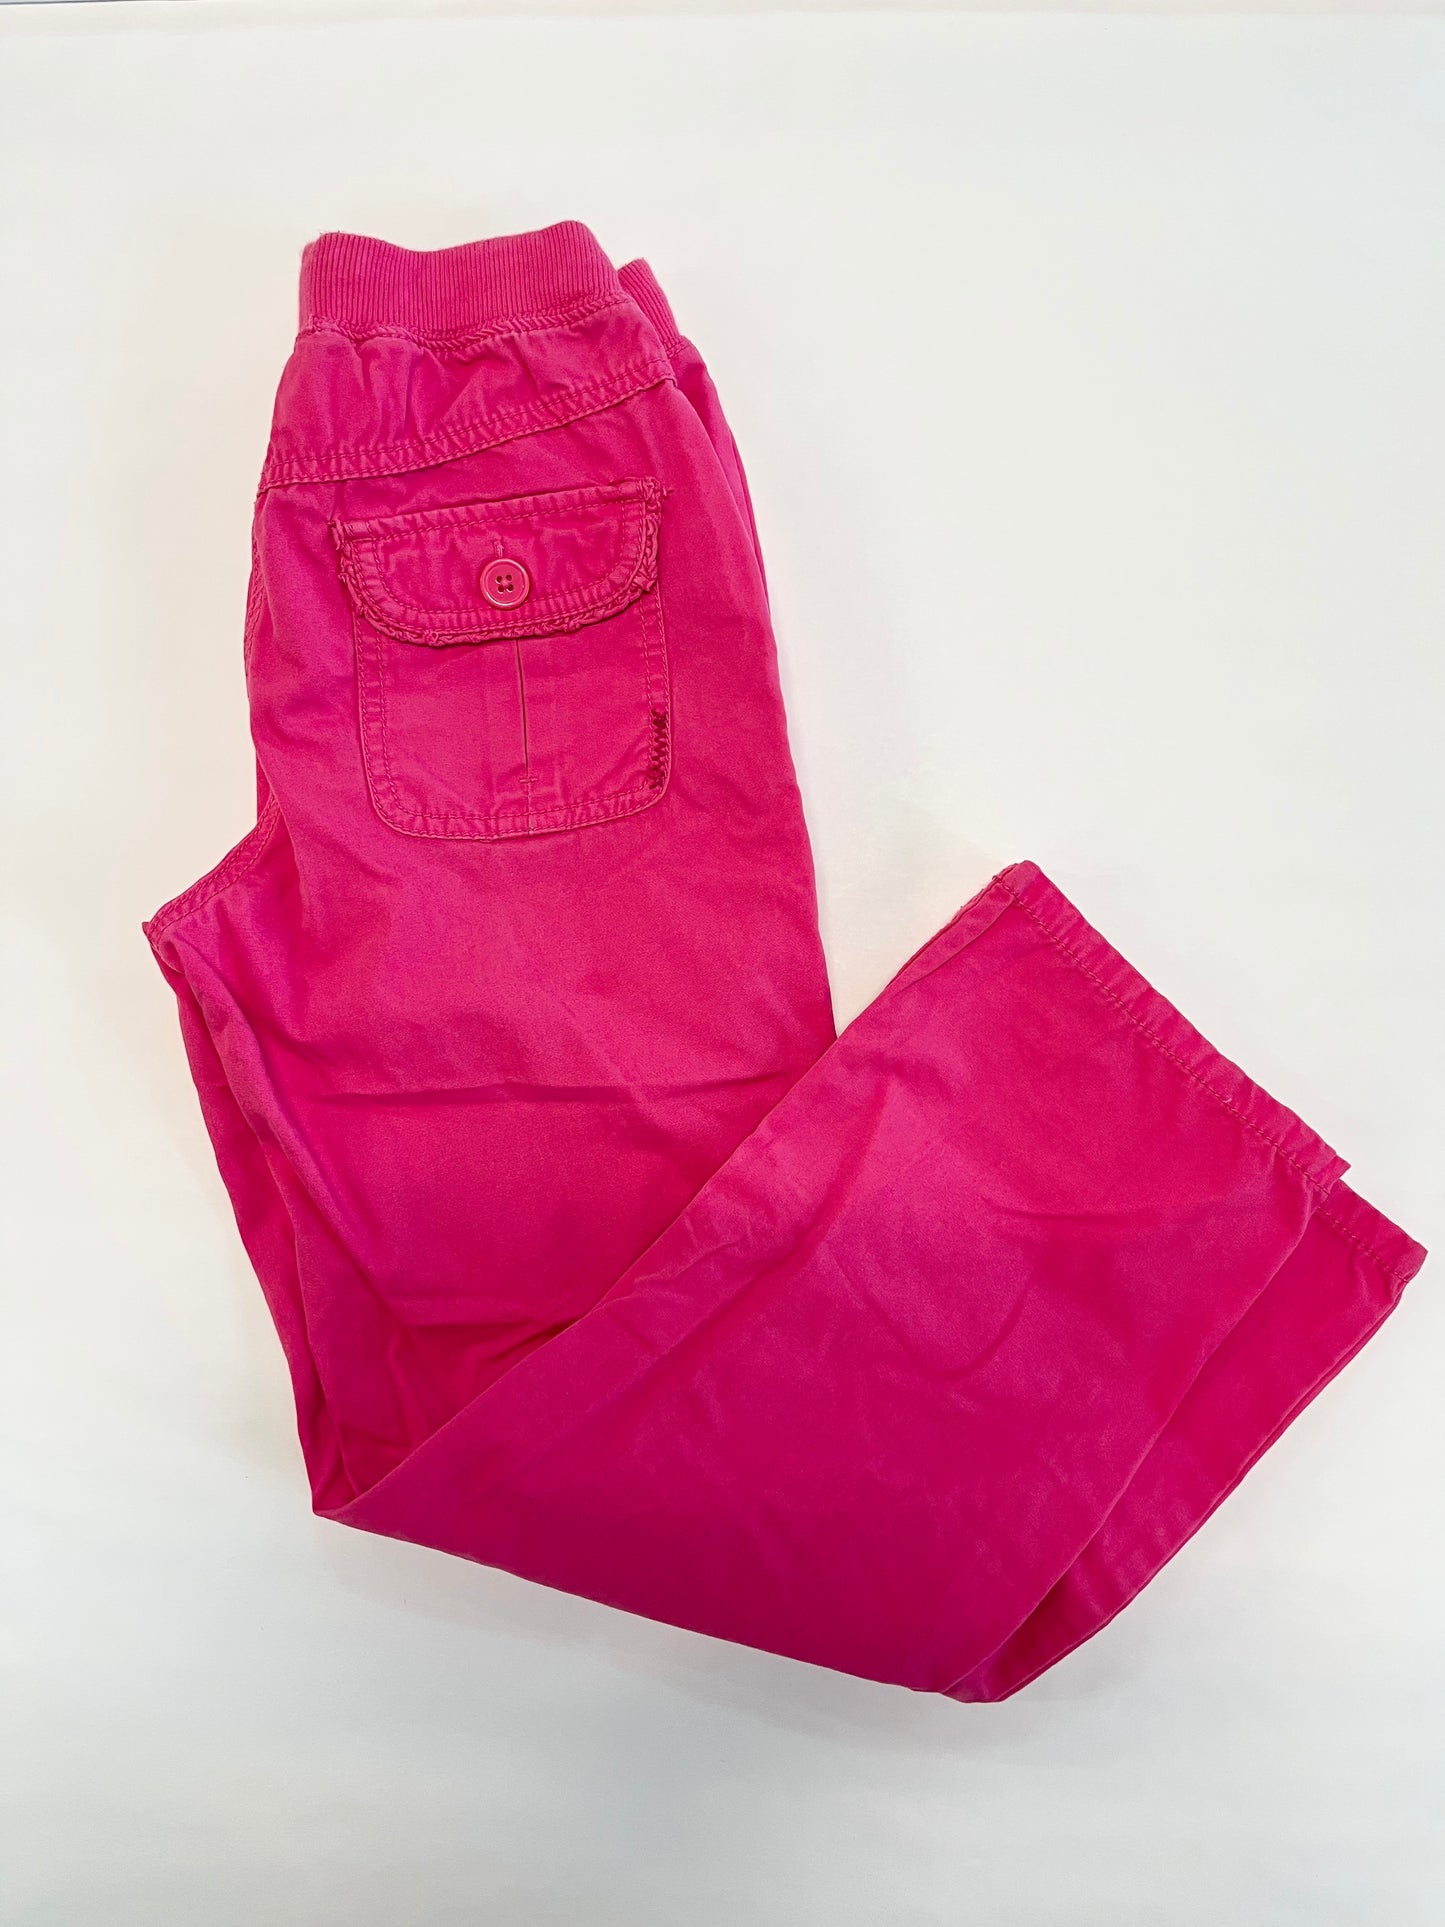 Hanna Andersson pink pants 140 (10)